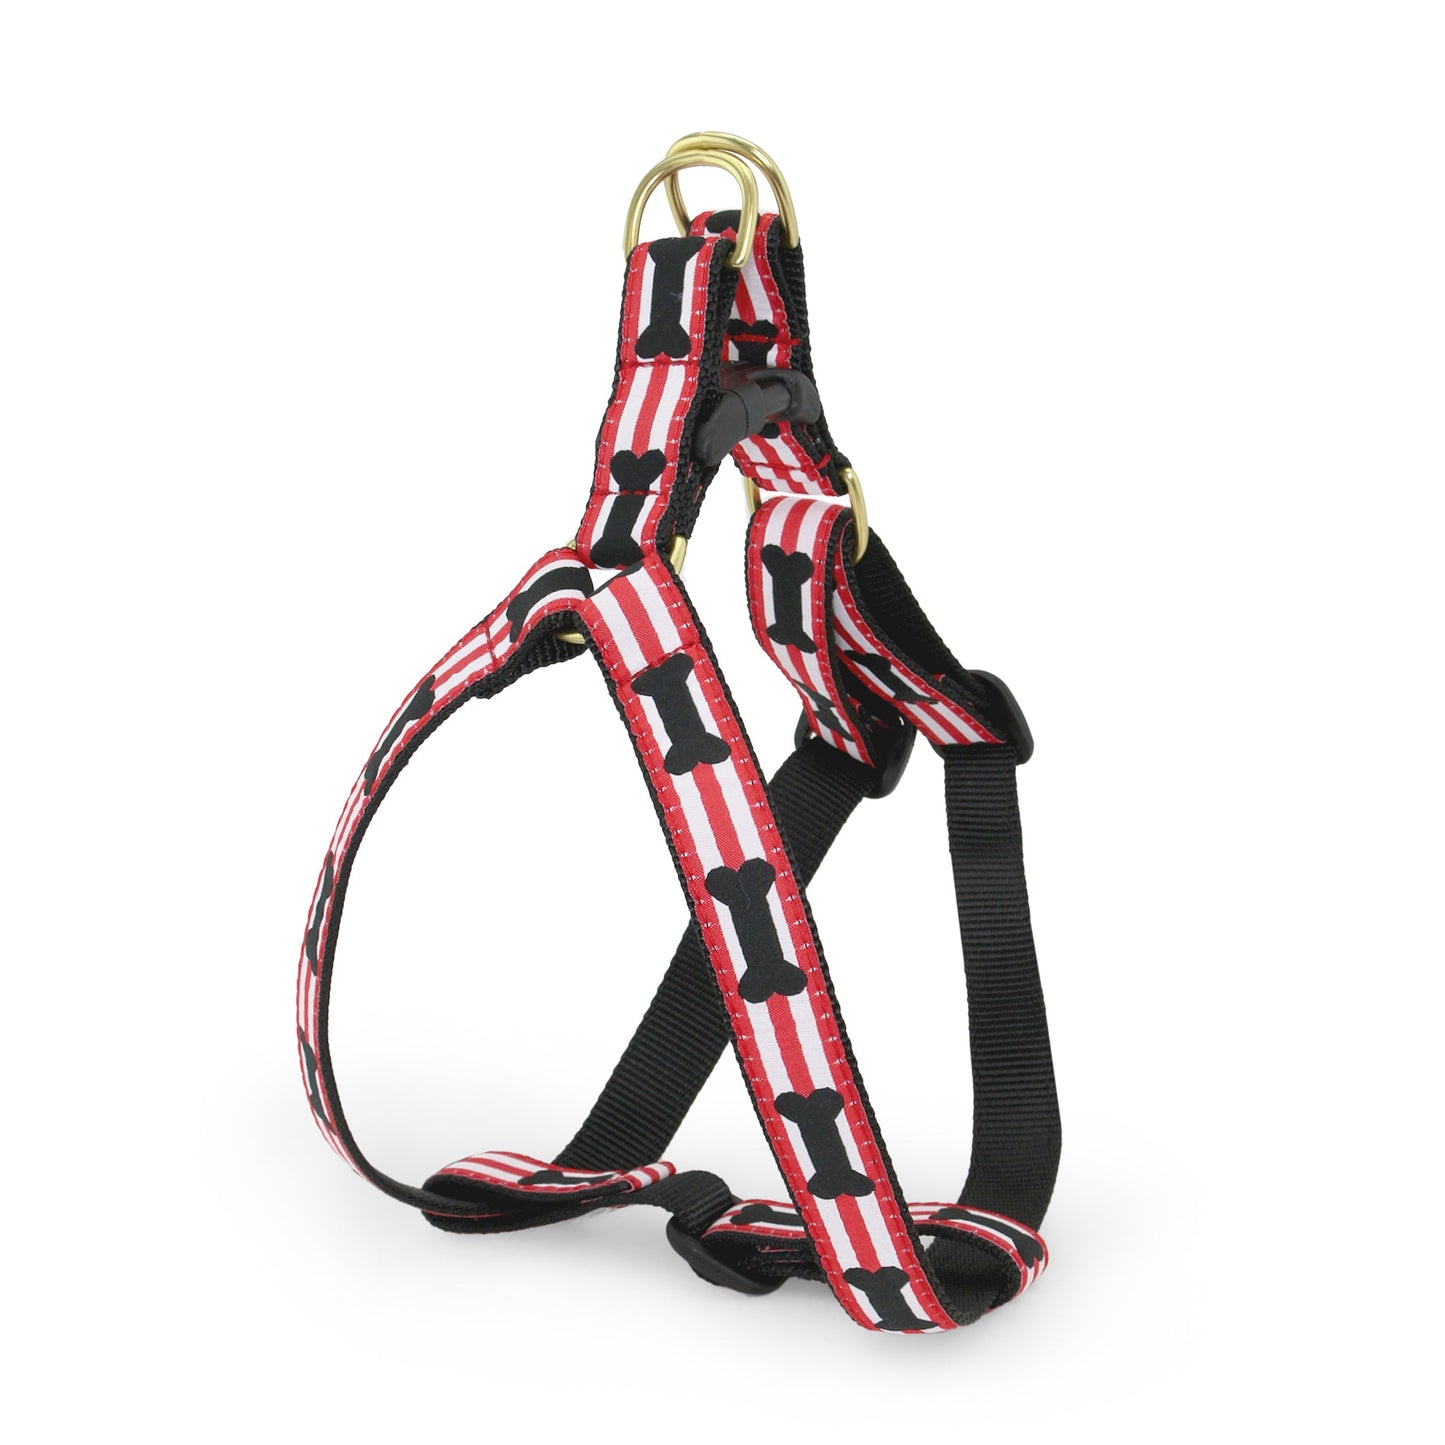 Got Bones Dog Harness by Up Country